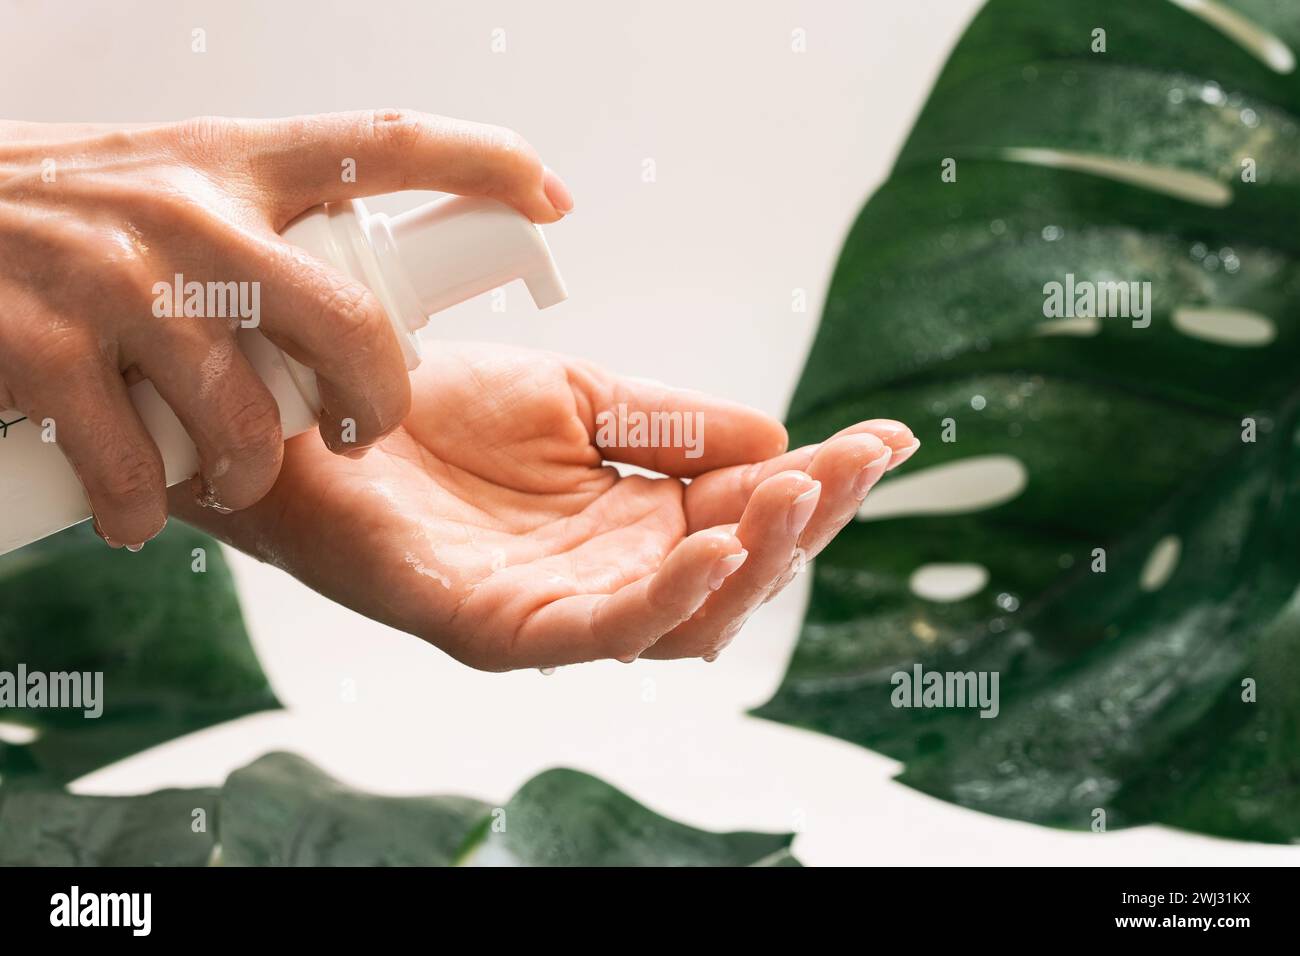 Woman is applying cleansing foam on her hand Stock Photo